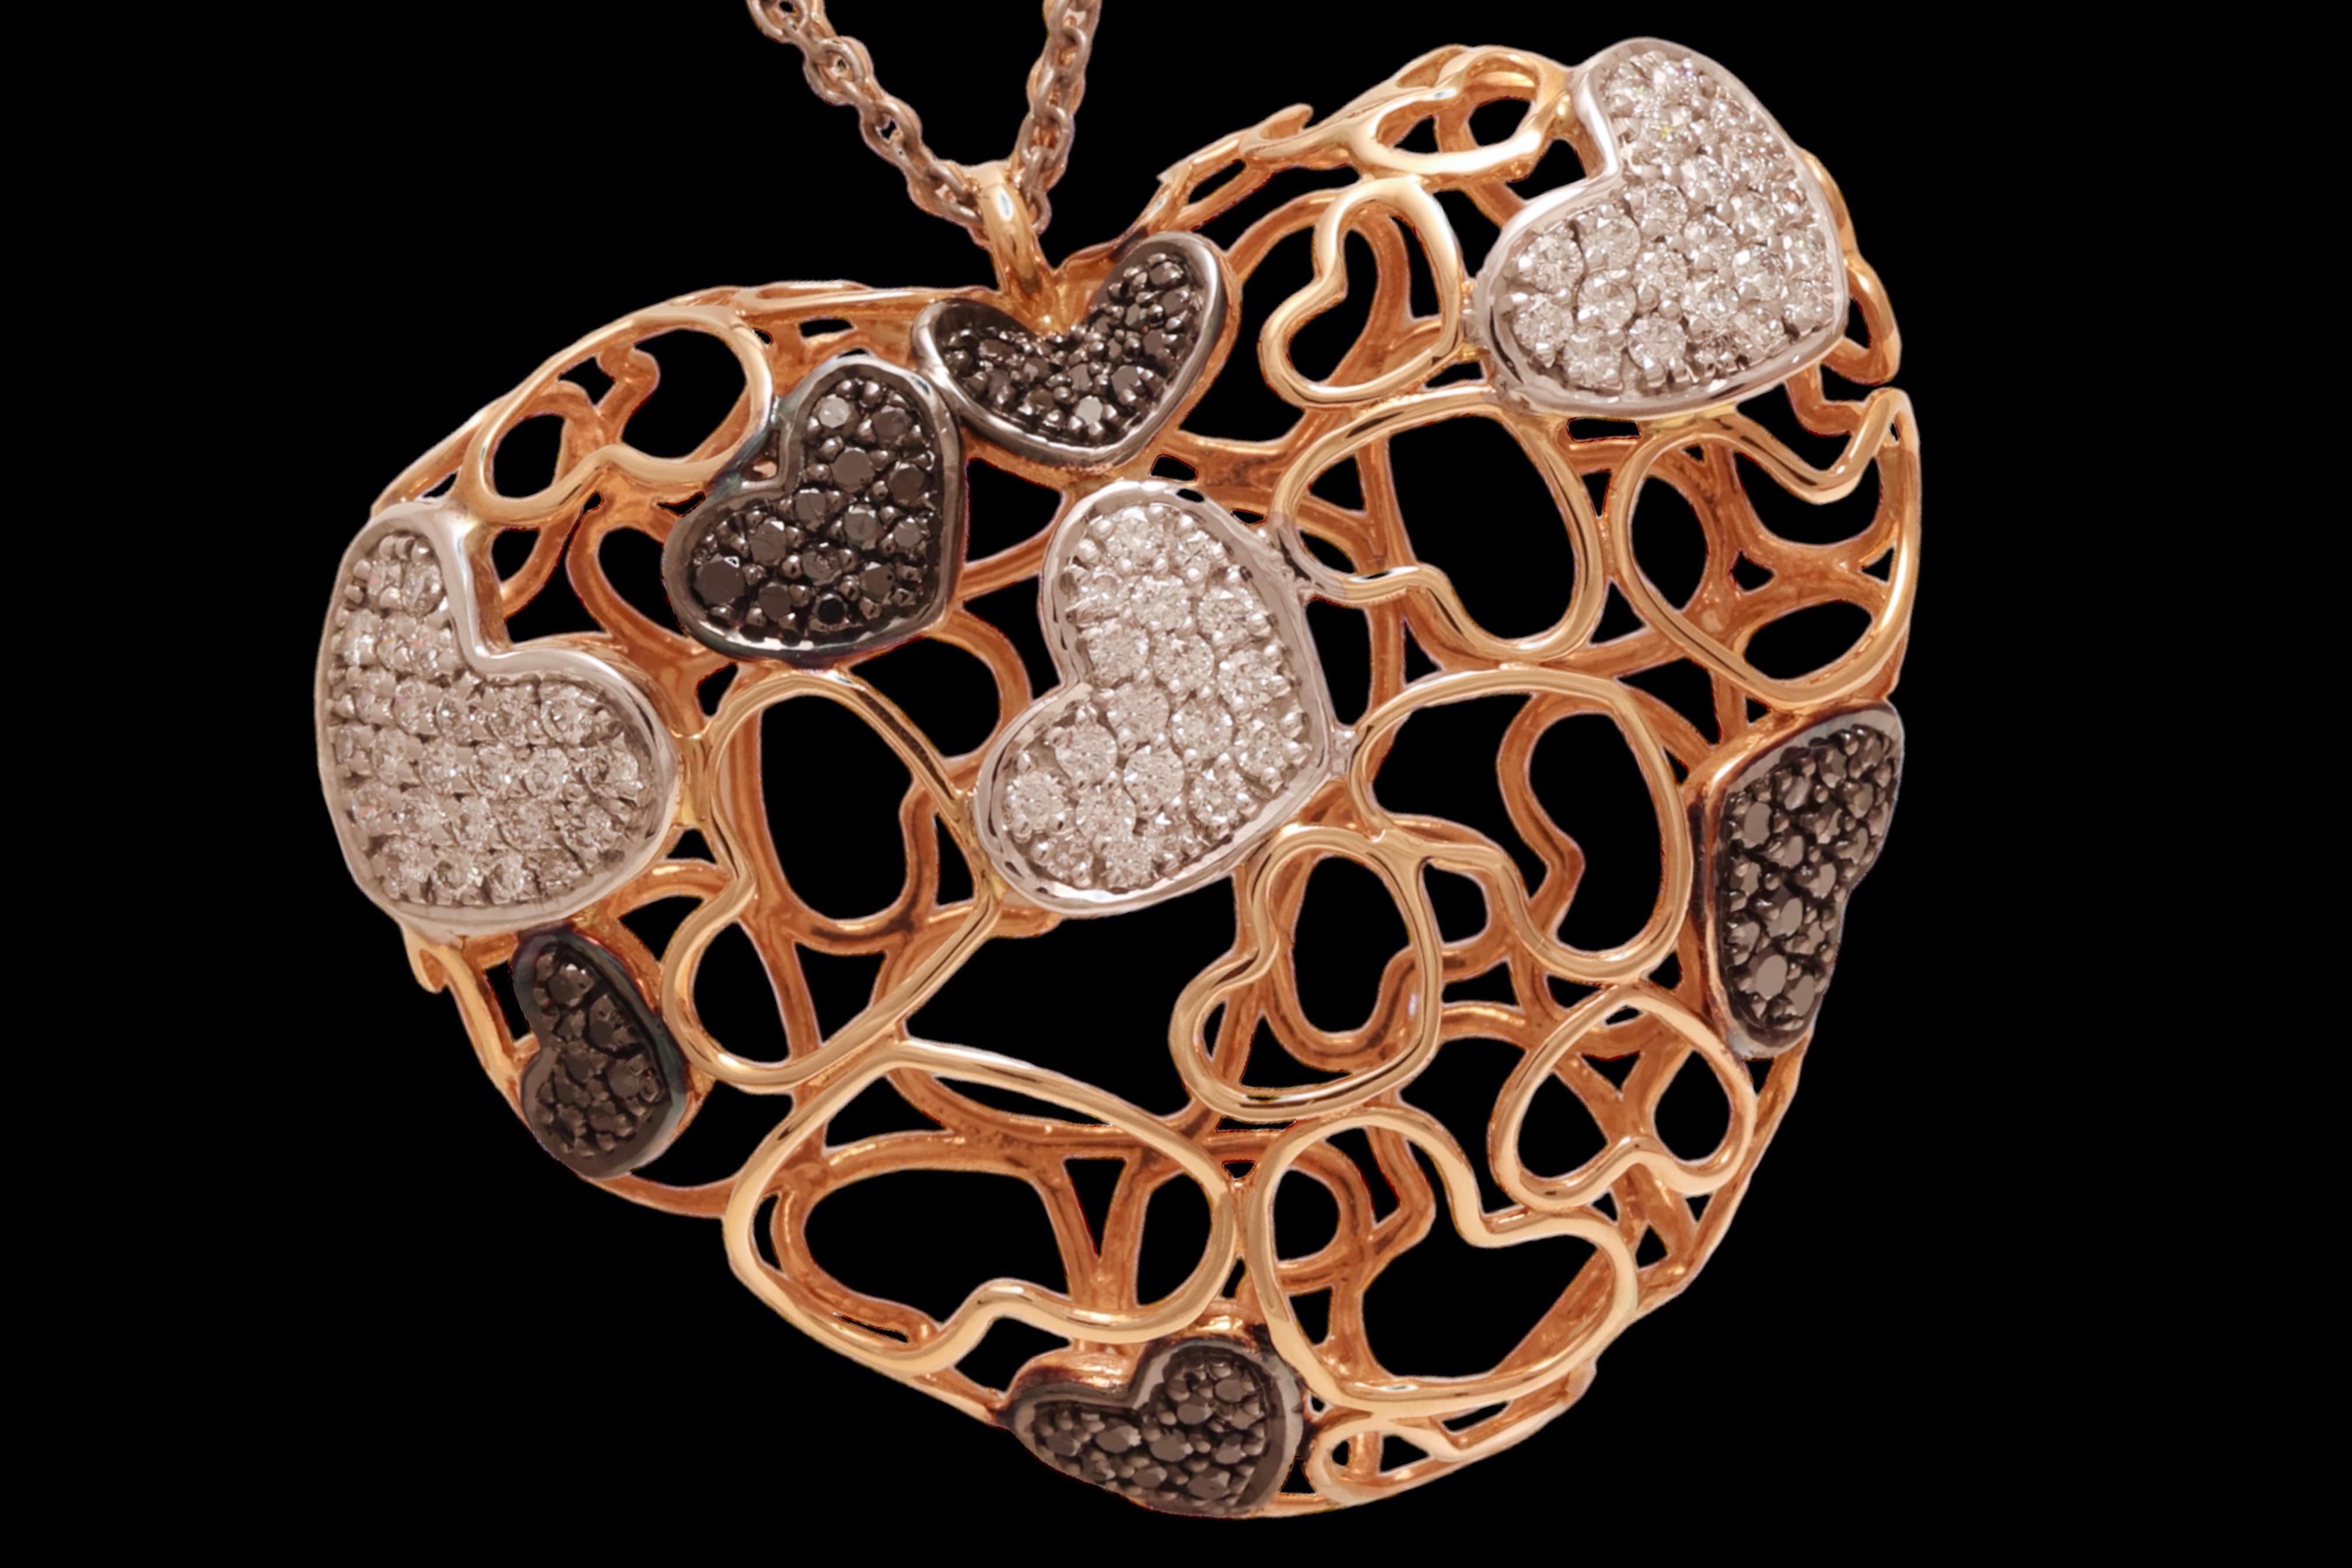 18kt Pink Gold 1.34ct White and 0.84 Ct Black Diamonds Heartshaped Necklace For Sale 1